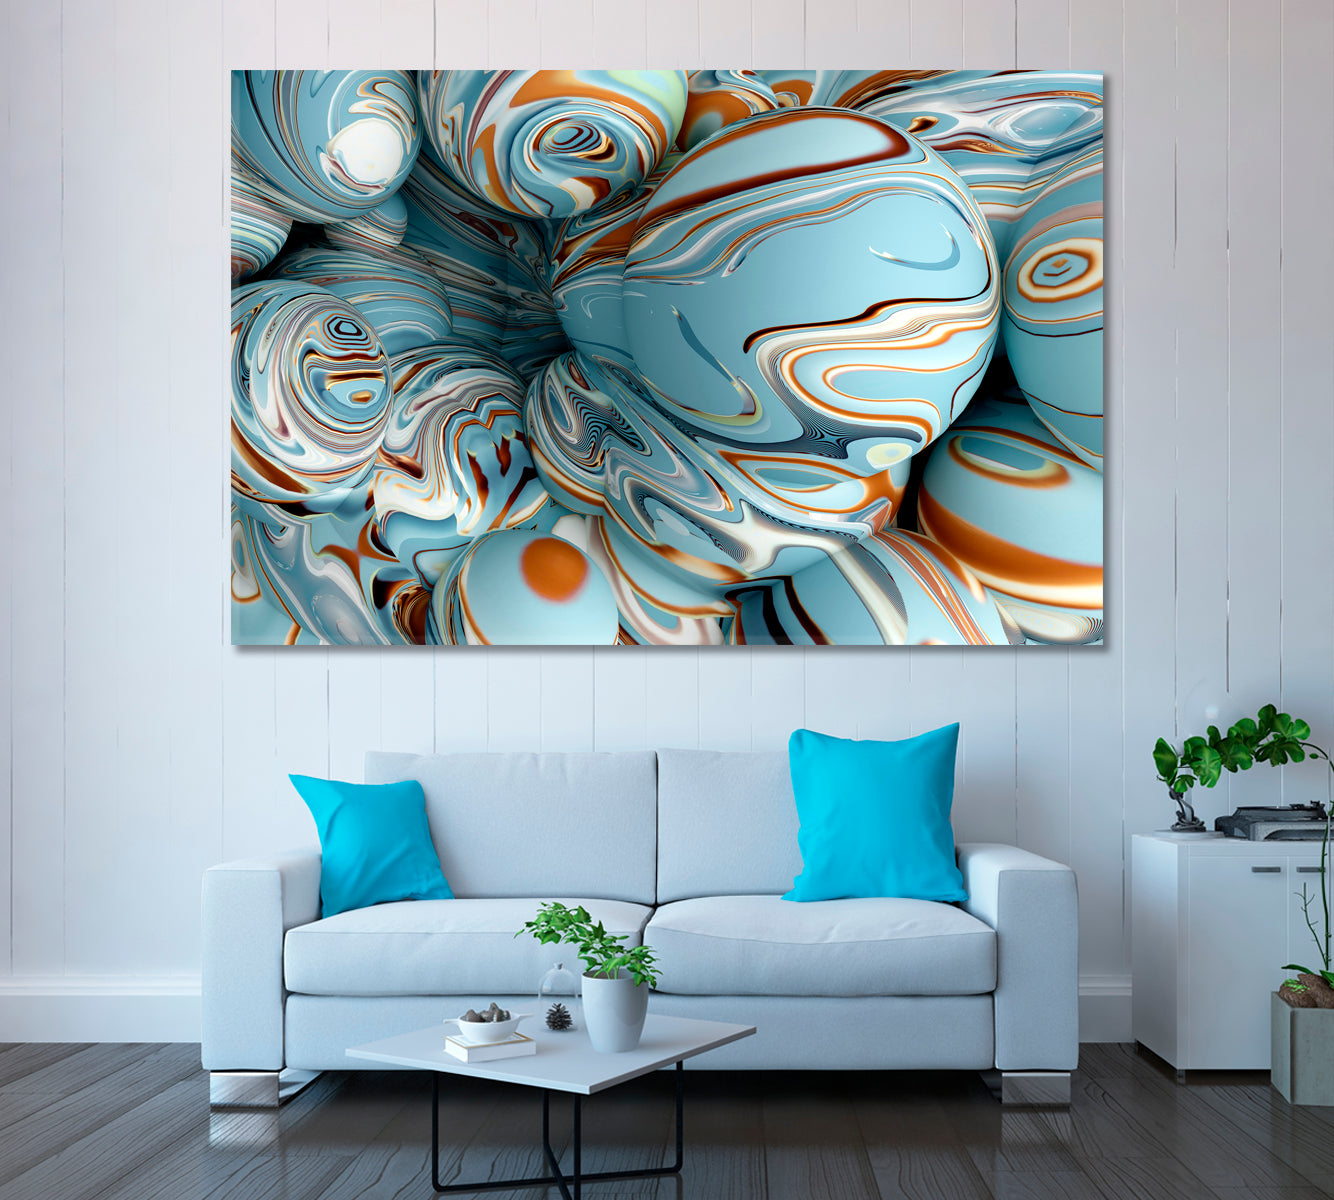 Abstract Blue Balls Canvas Print ArtLexy 1 Panel 24"x16" inches 